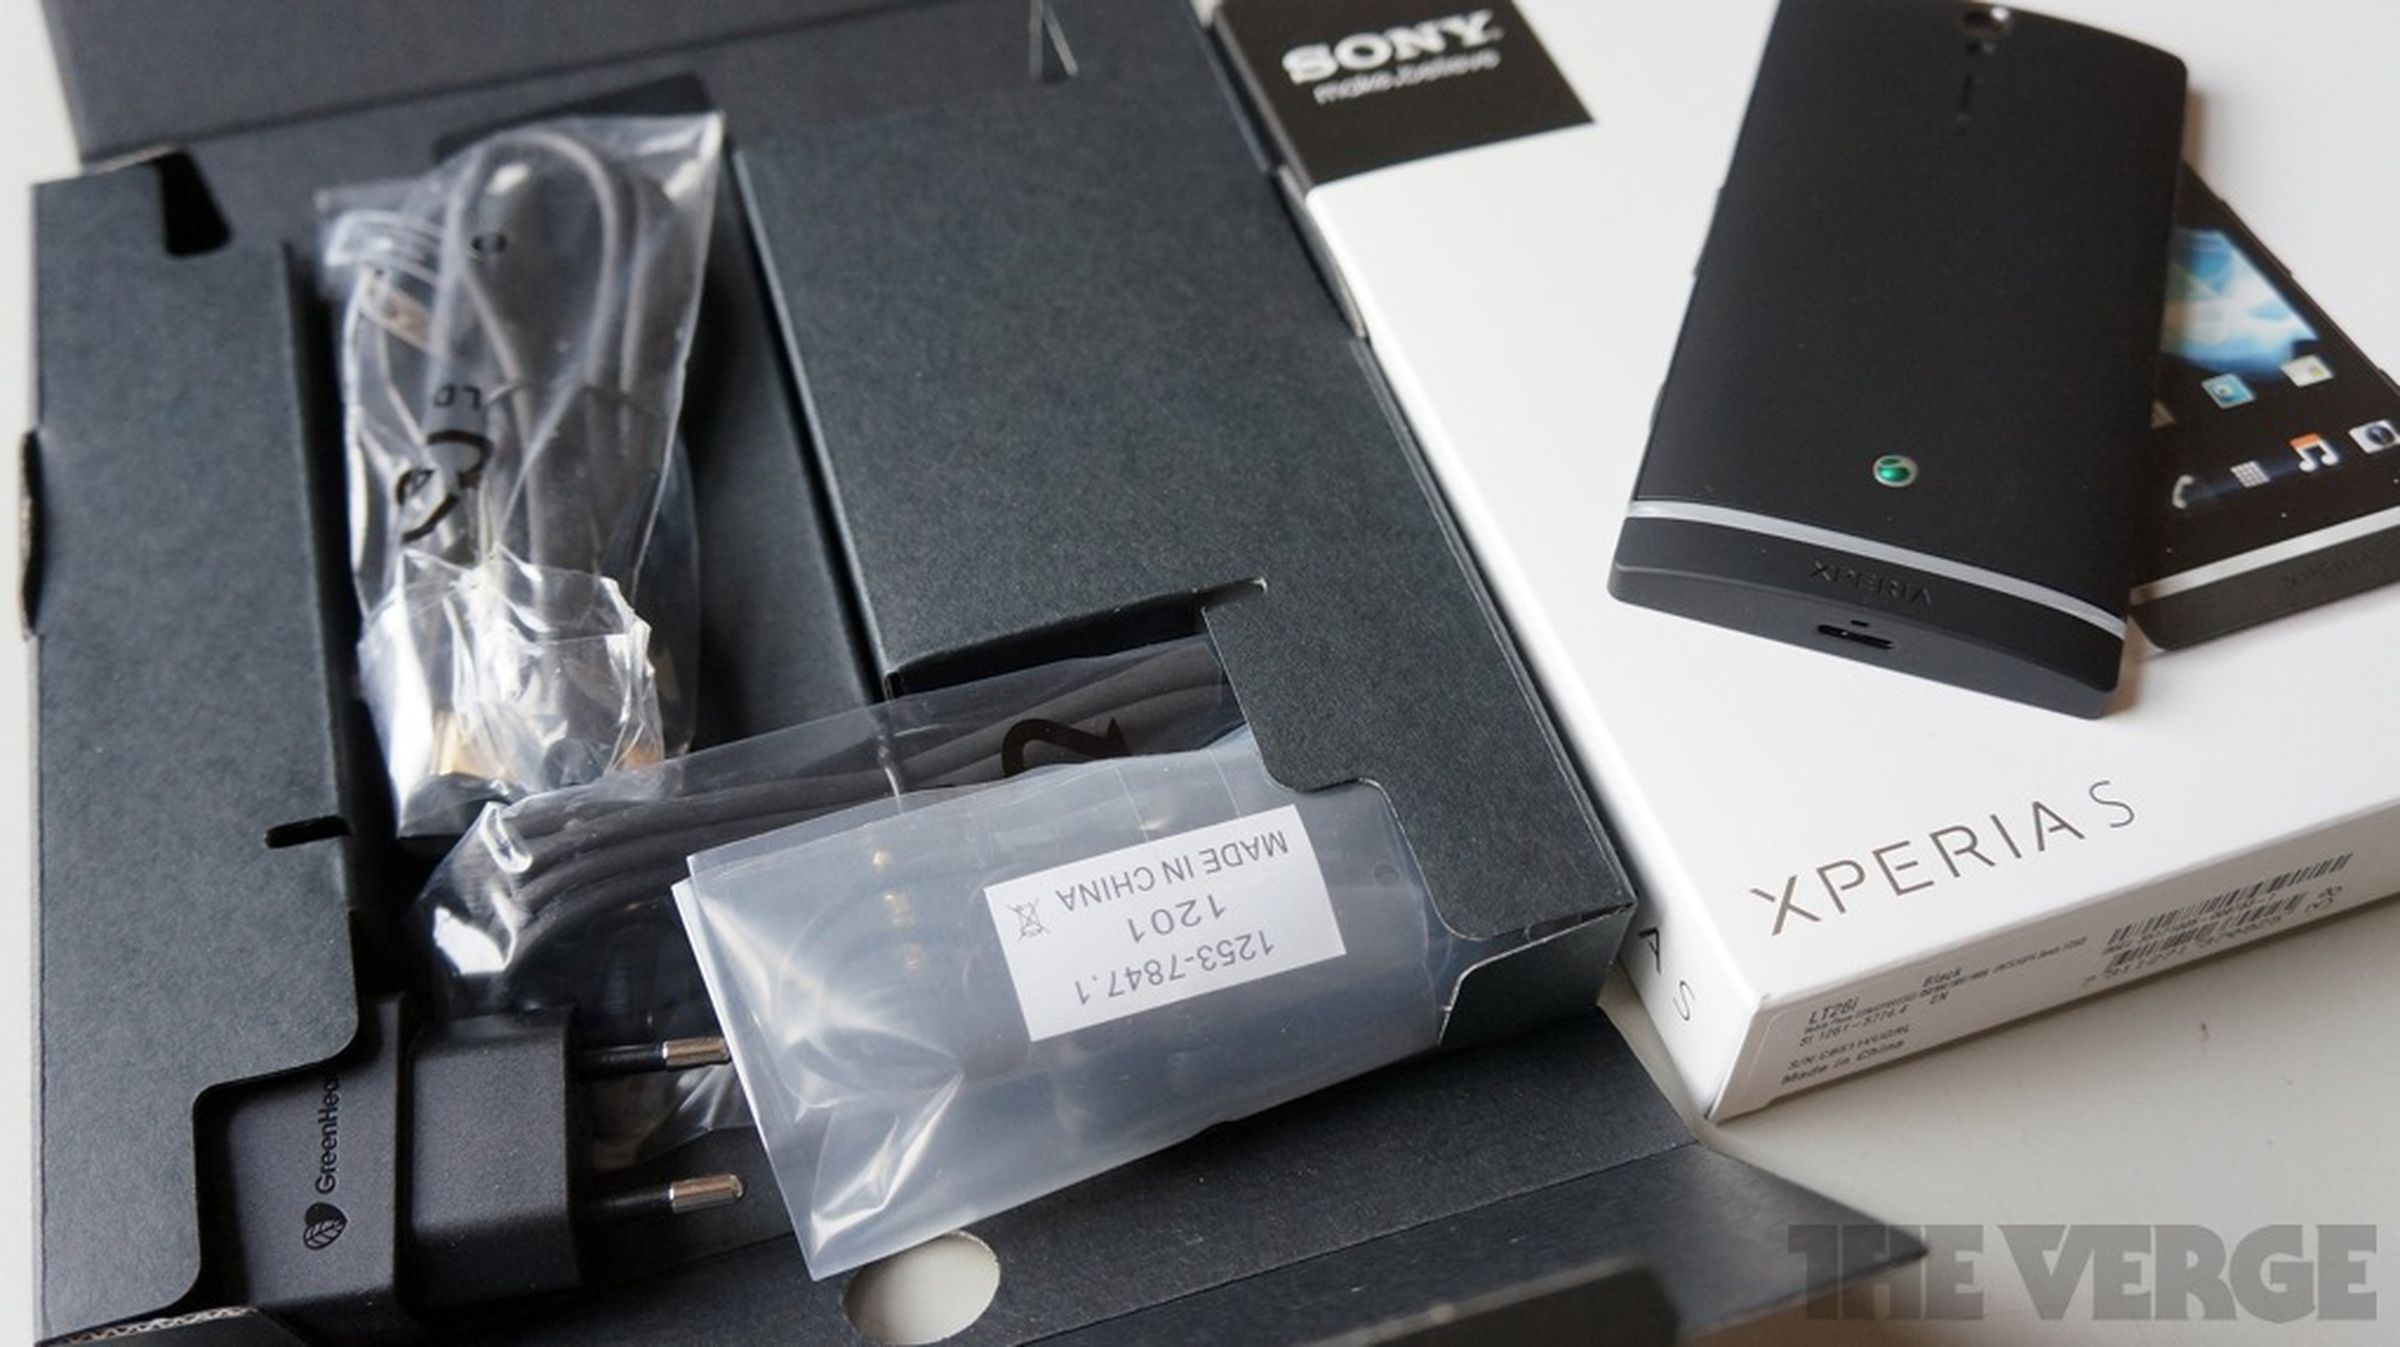 Xperia S unboxing and hands-on photos